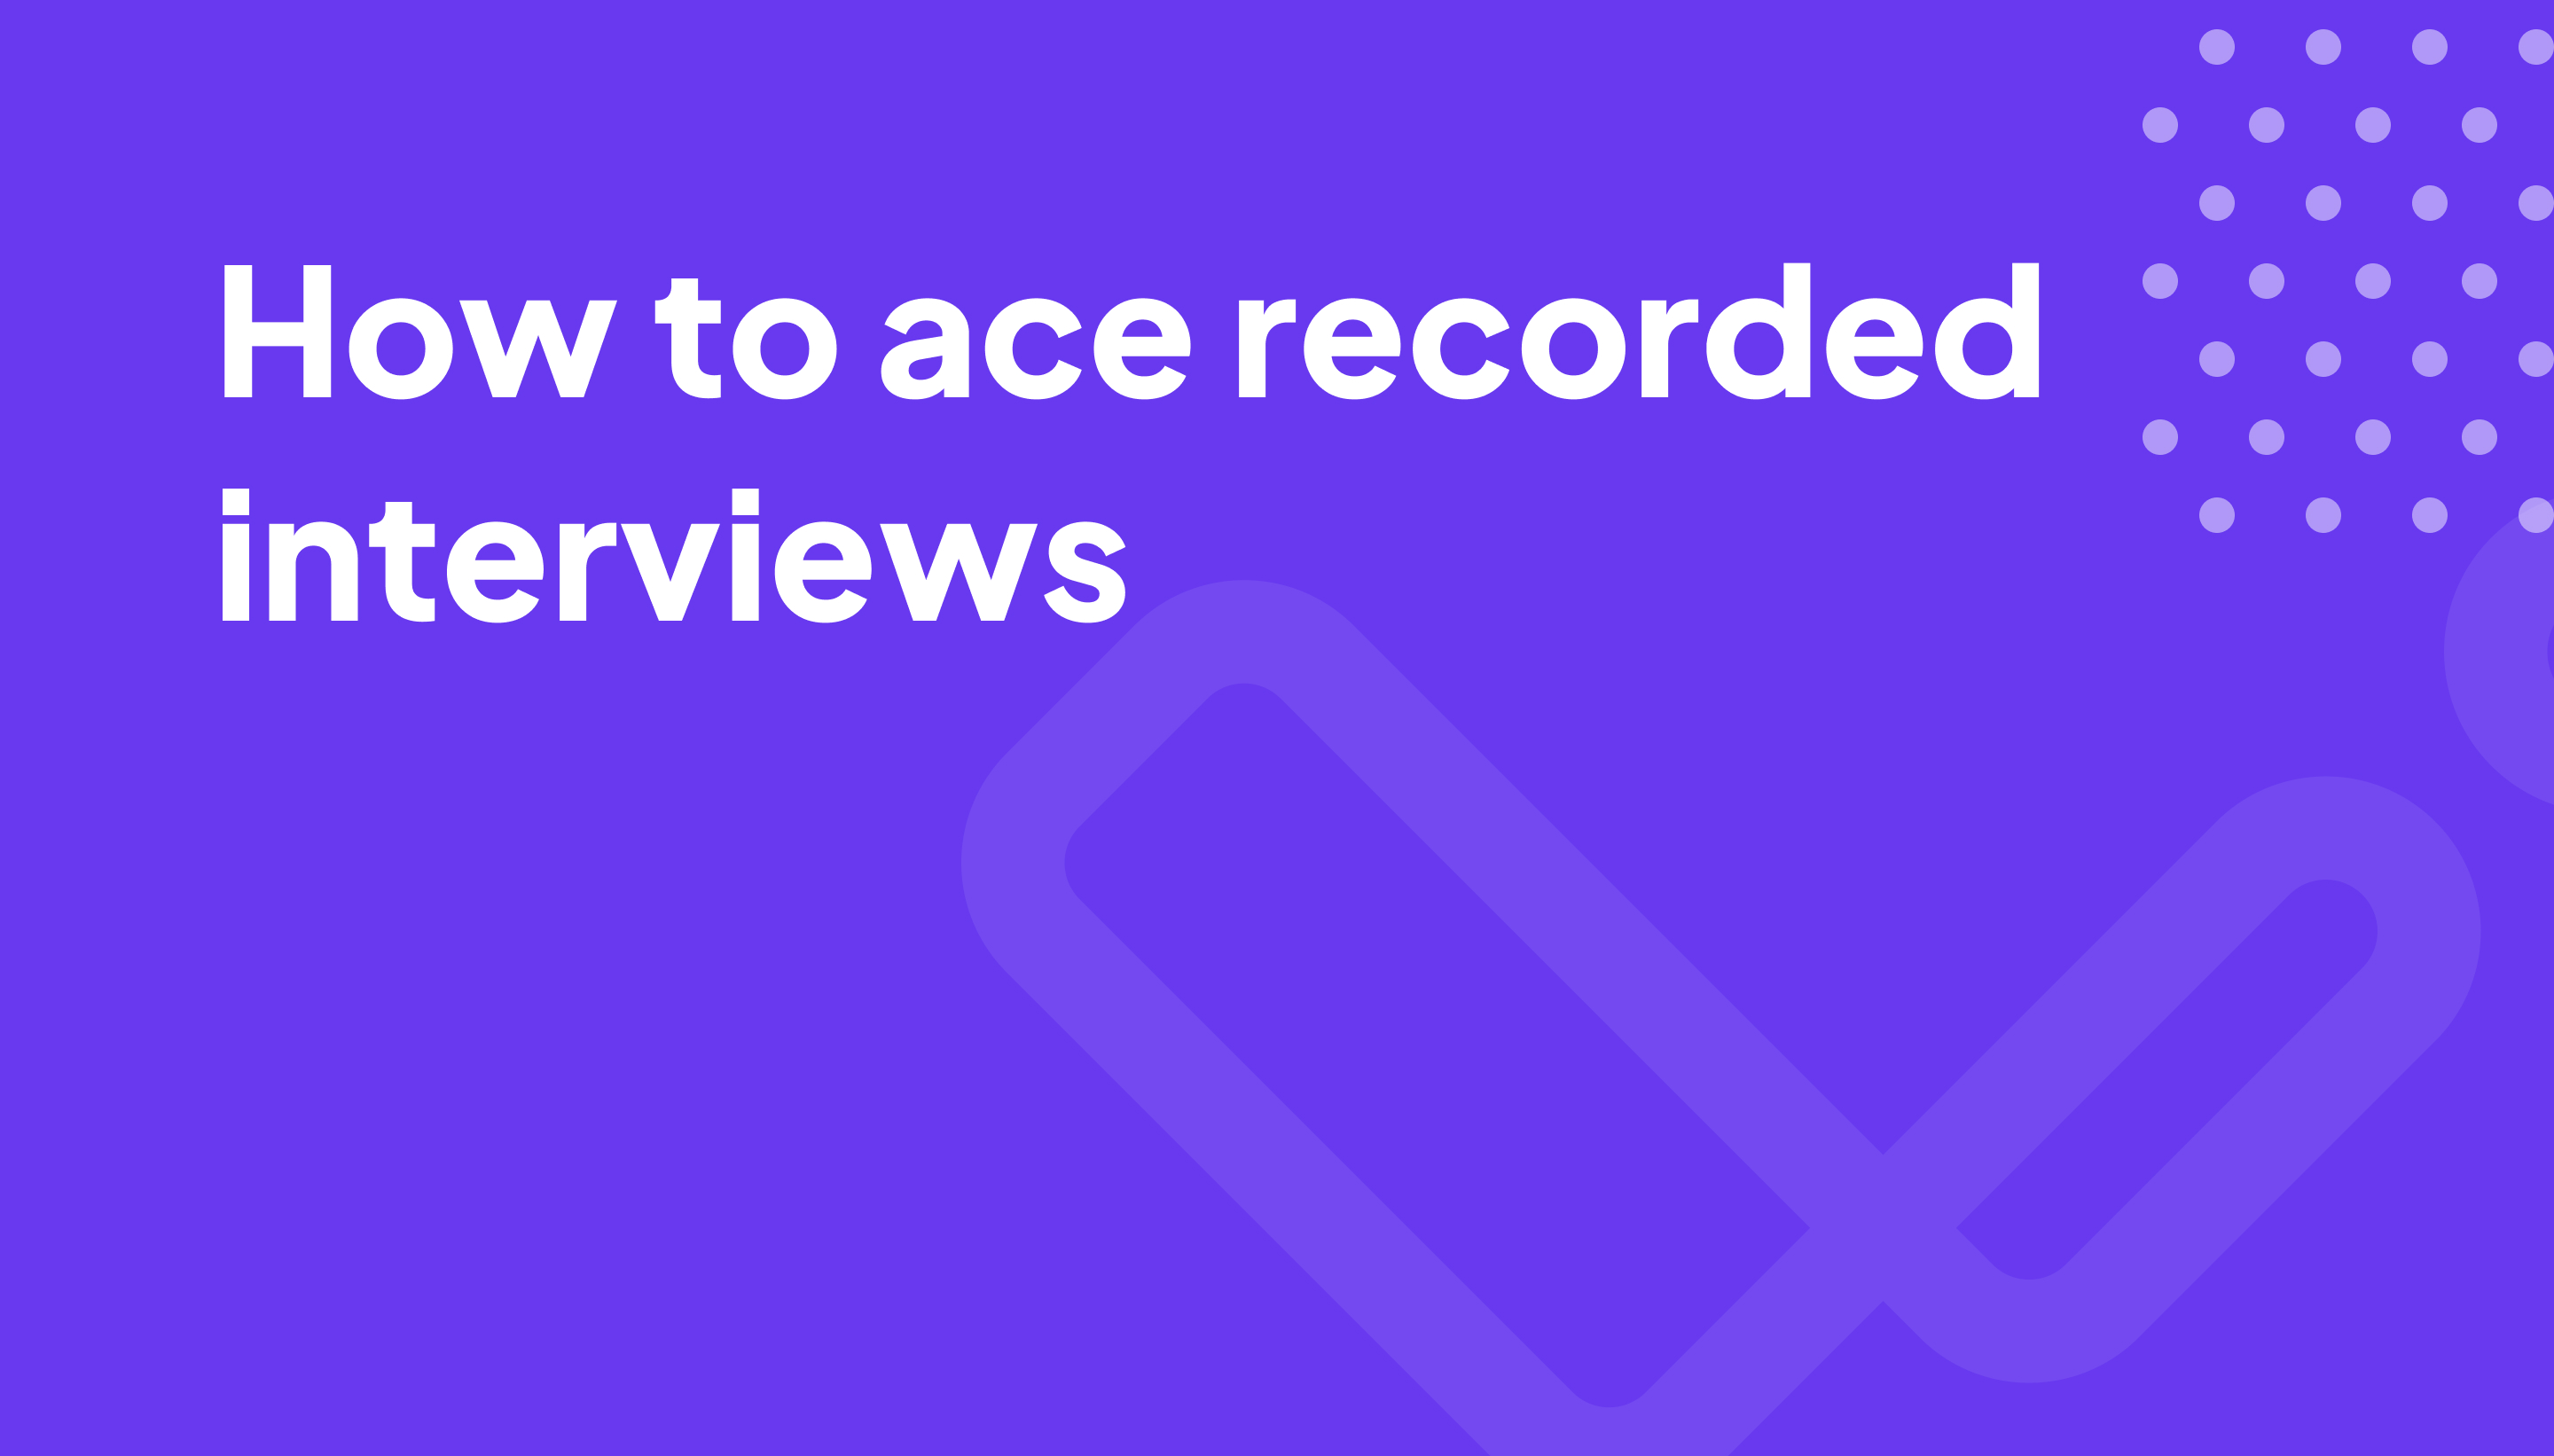 How to ace recorded interviews